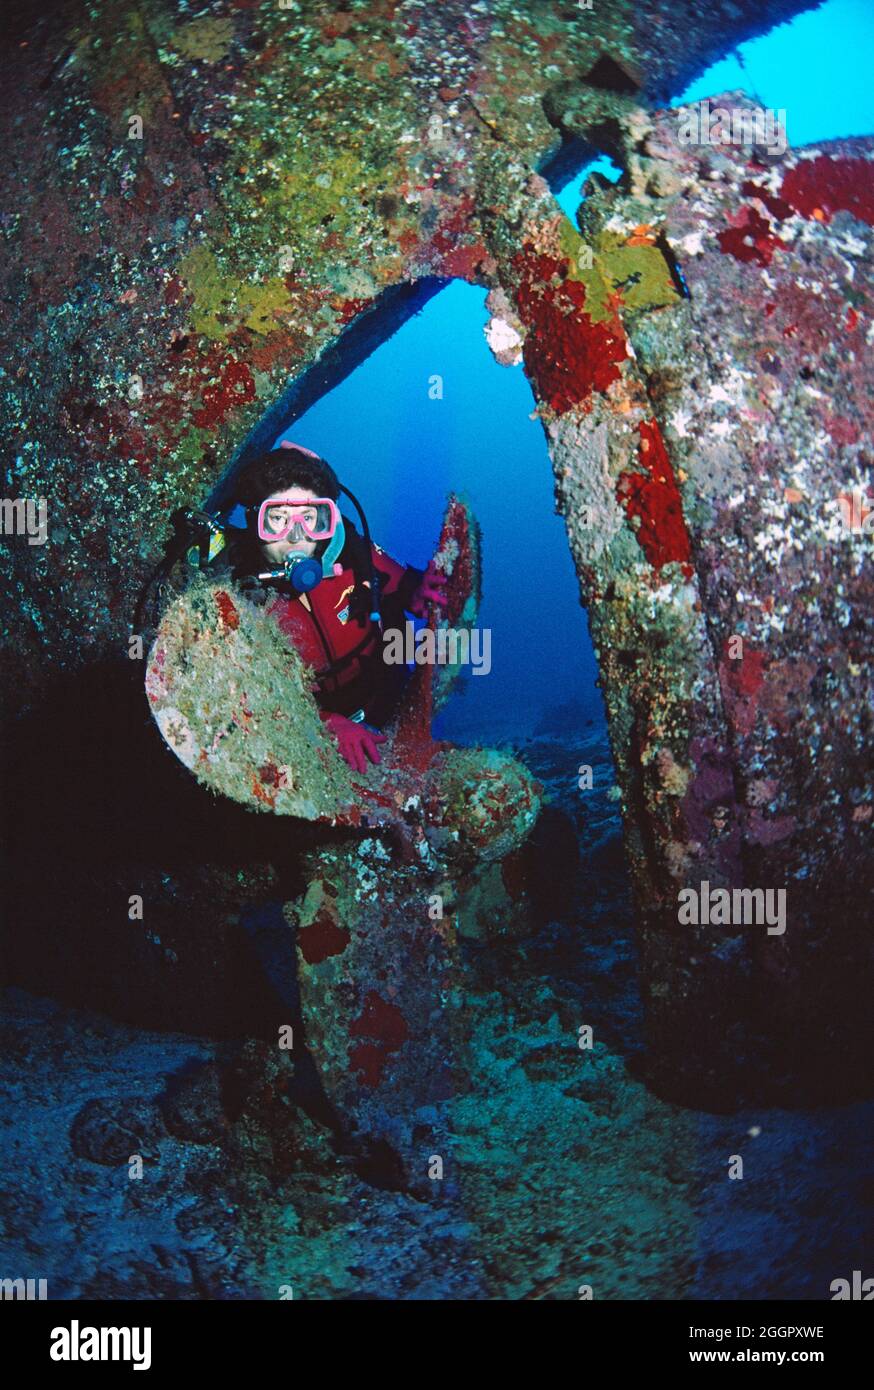 Micronesia. Scuba diving woman underwater with shipwreck propeller and rudder. Stock Photo